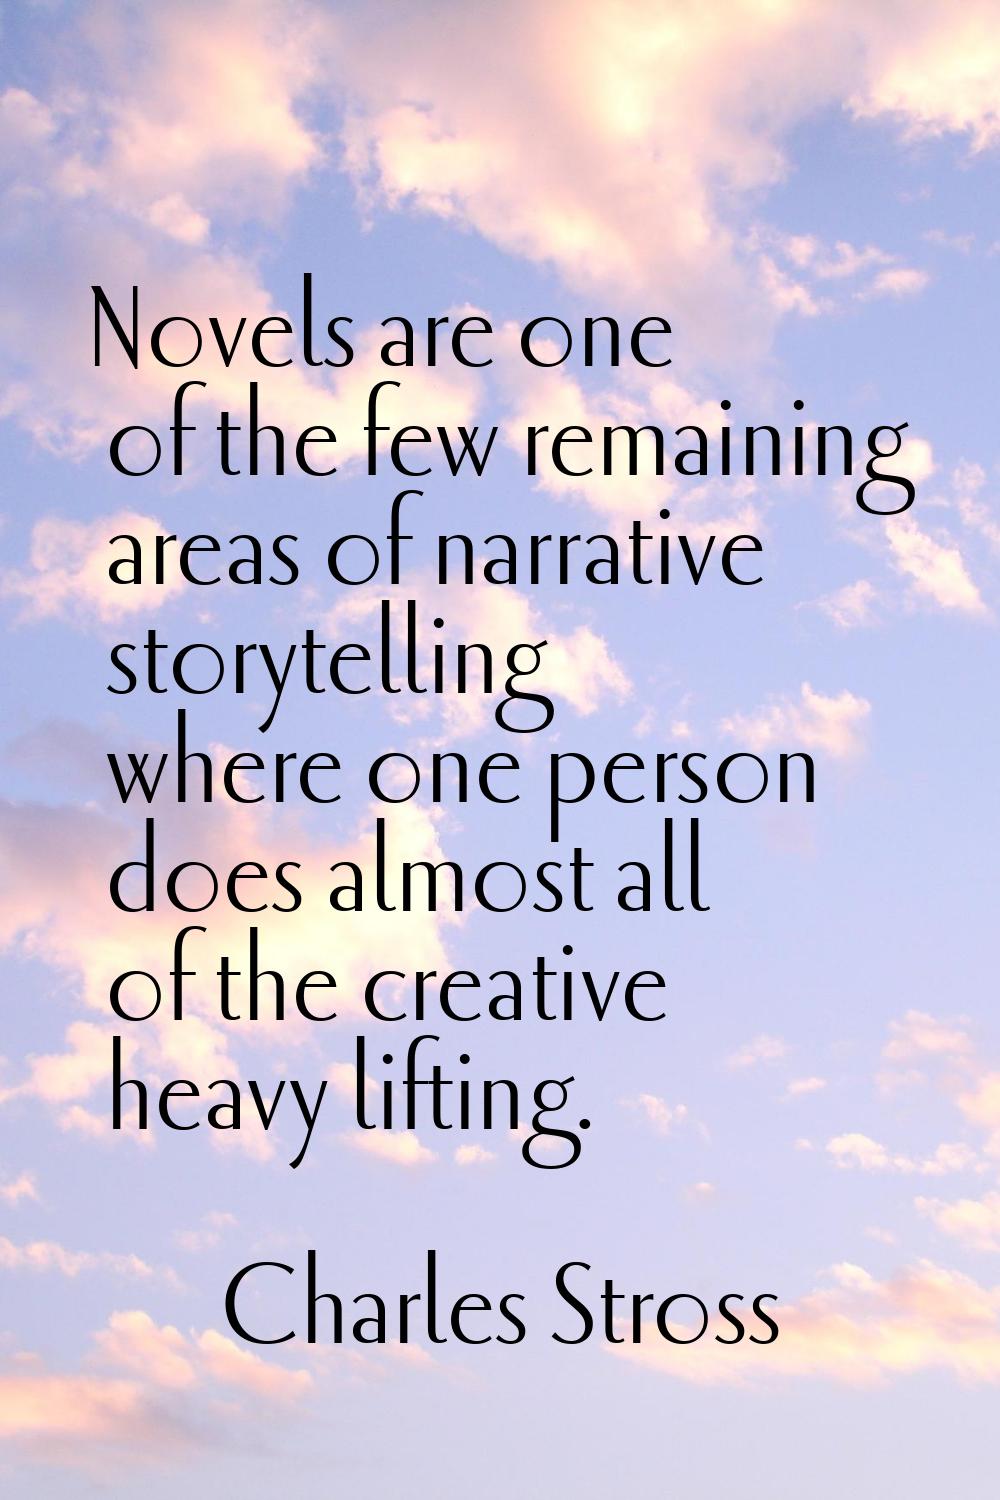 Novels are one of the few remaining areas of narrative storytelling where one person does almost al